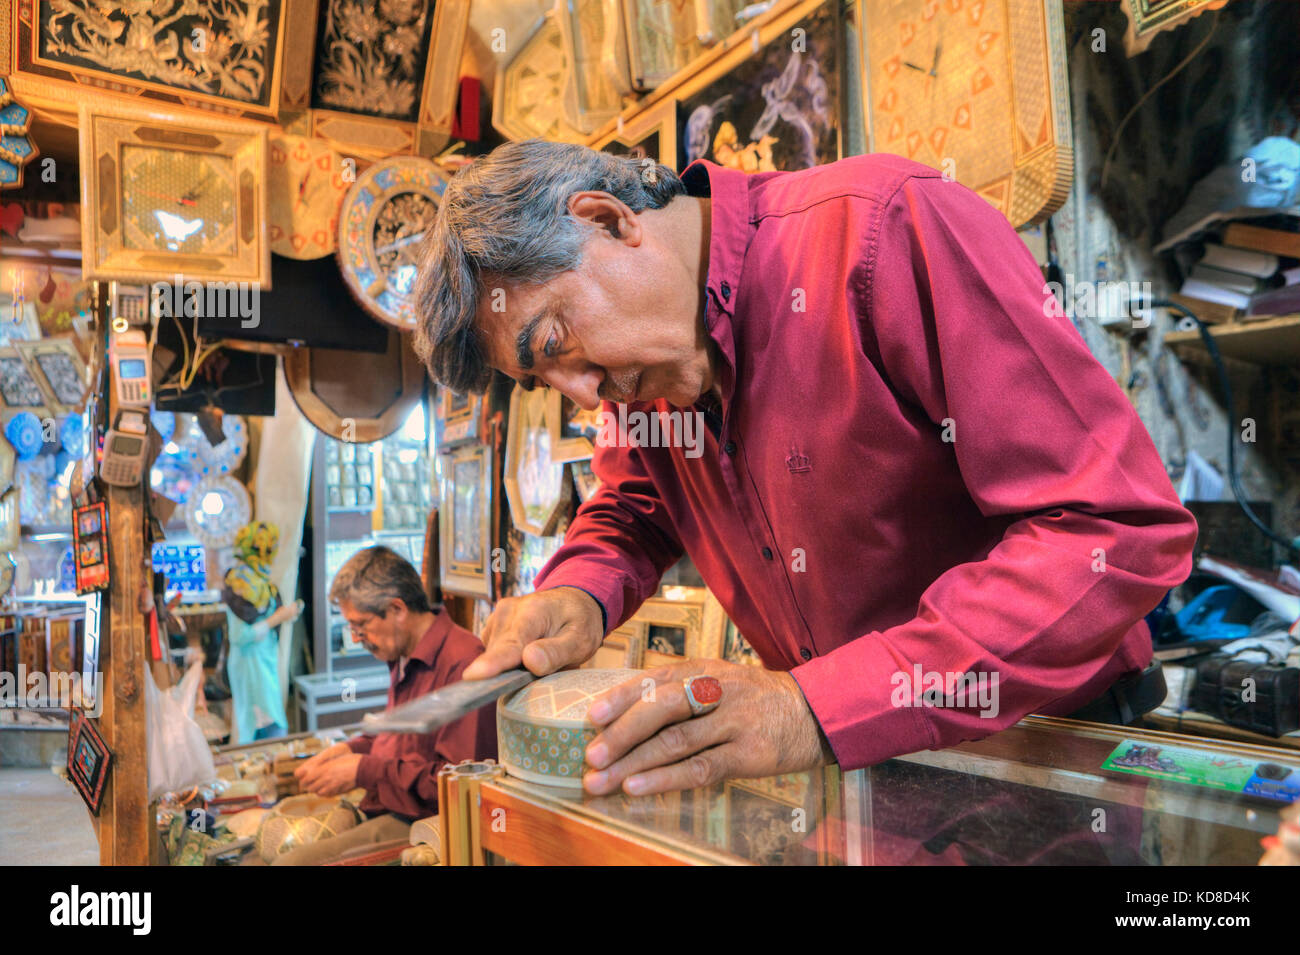 Fars Province, Shiraz, Iran - 19 april, 2017: Art workshop at the Vakil bazaar, the artist produces handiwork for sale in the shop of artistic product Stock Photo